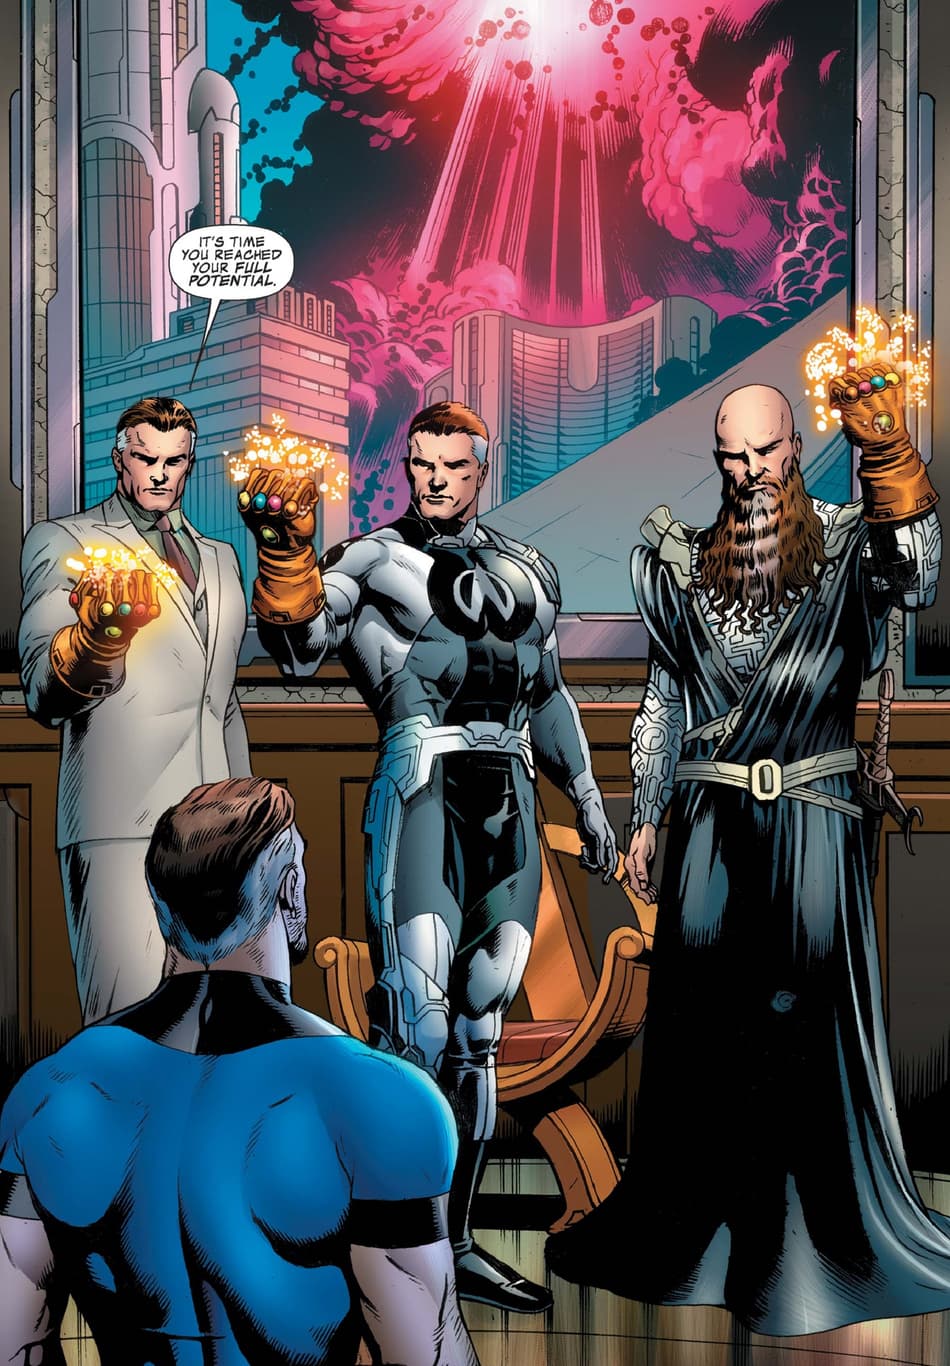 The Interdimensional Council of Reeds in FANTASTIC FOUR (1998) #570.